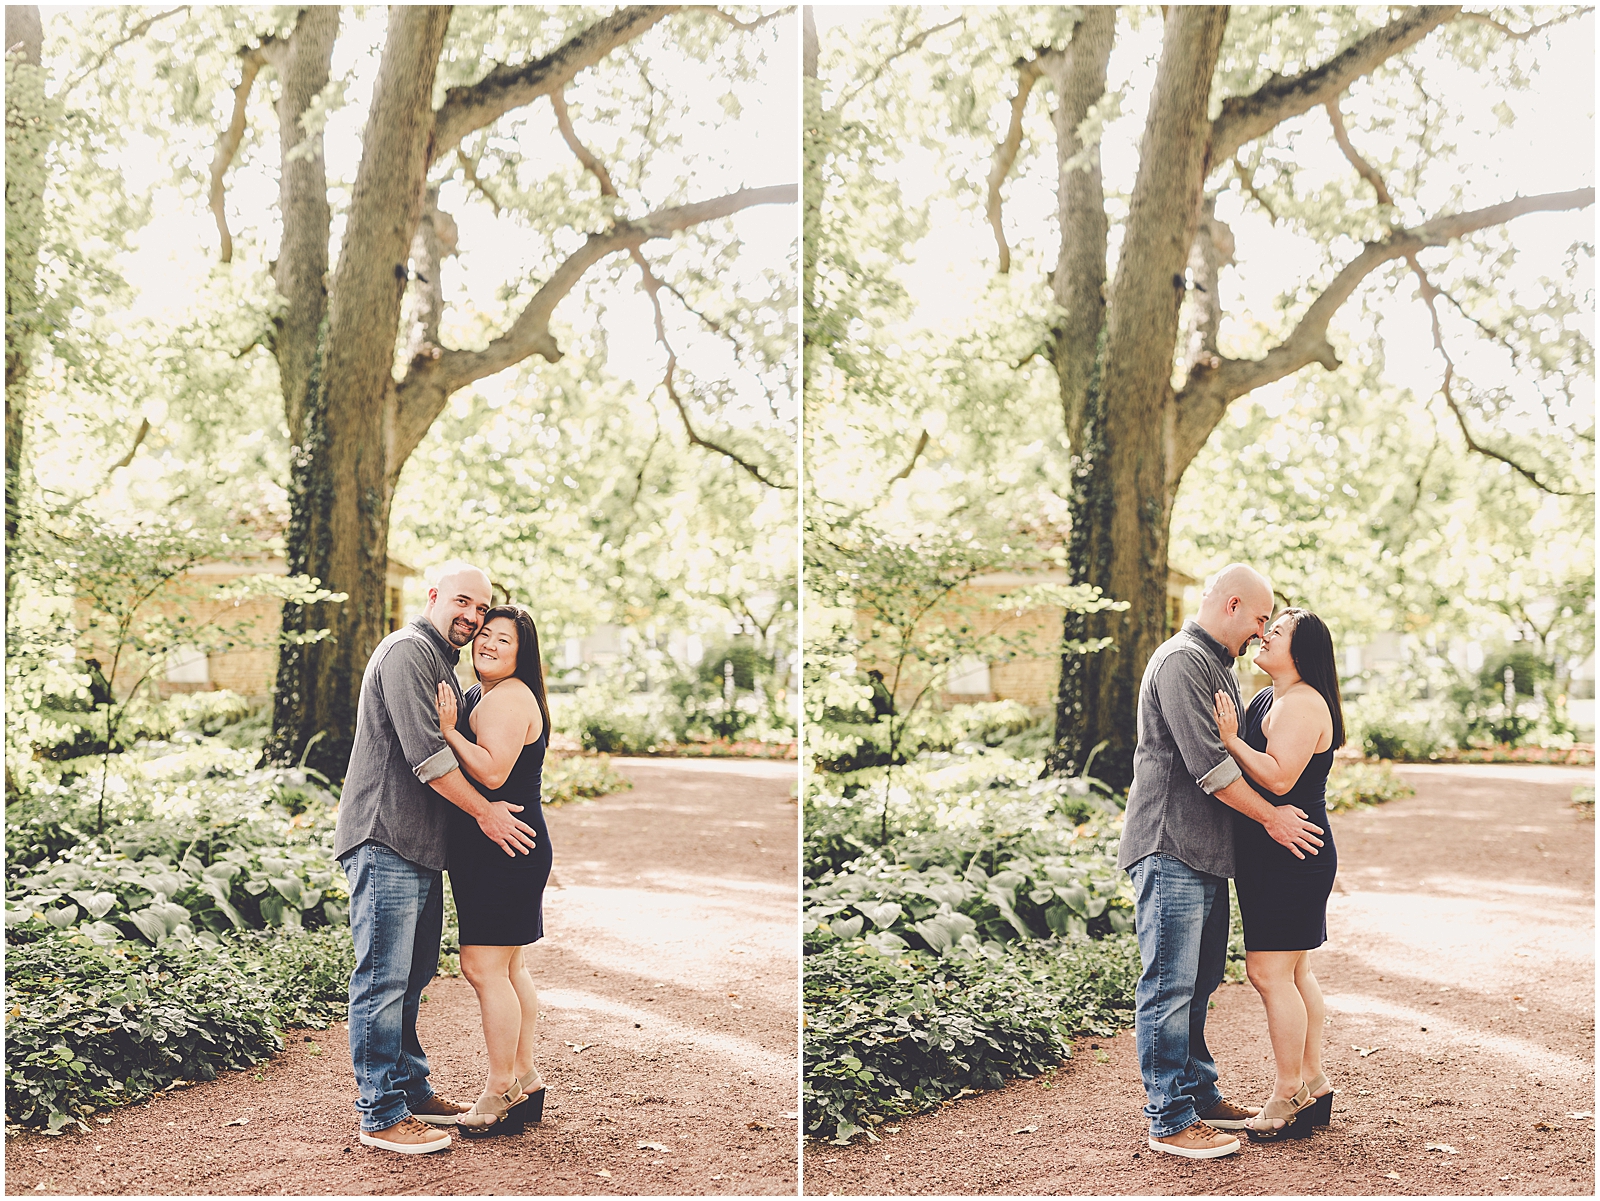 CayLee and Ryan's anniversary photos at Governor Small Park in Kankakee, IL with Chicagoland wedding photographer Kara Evans Photographer.